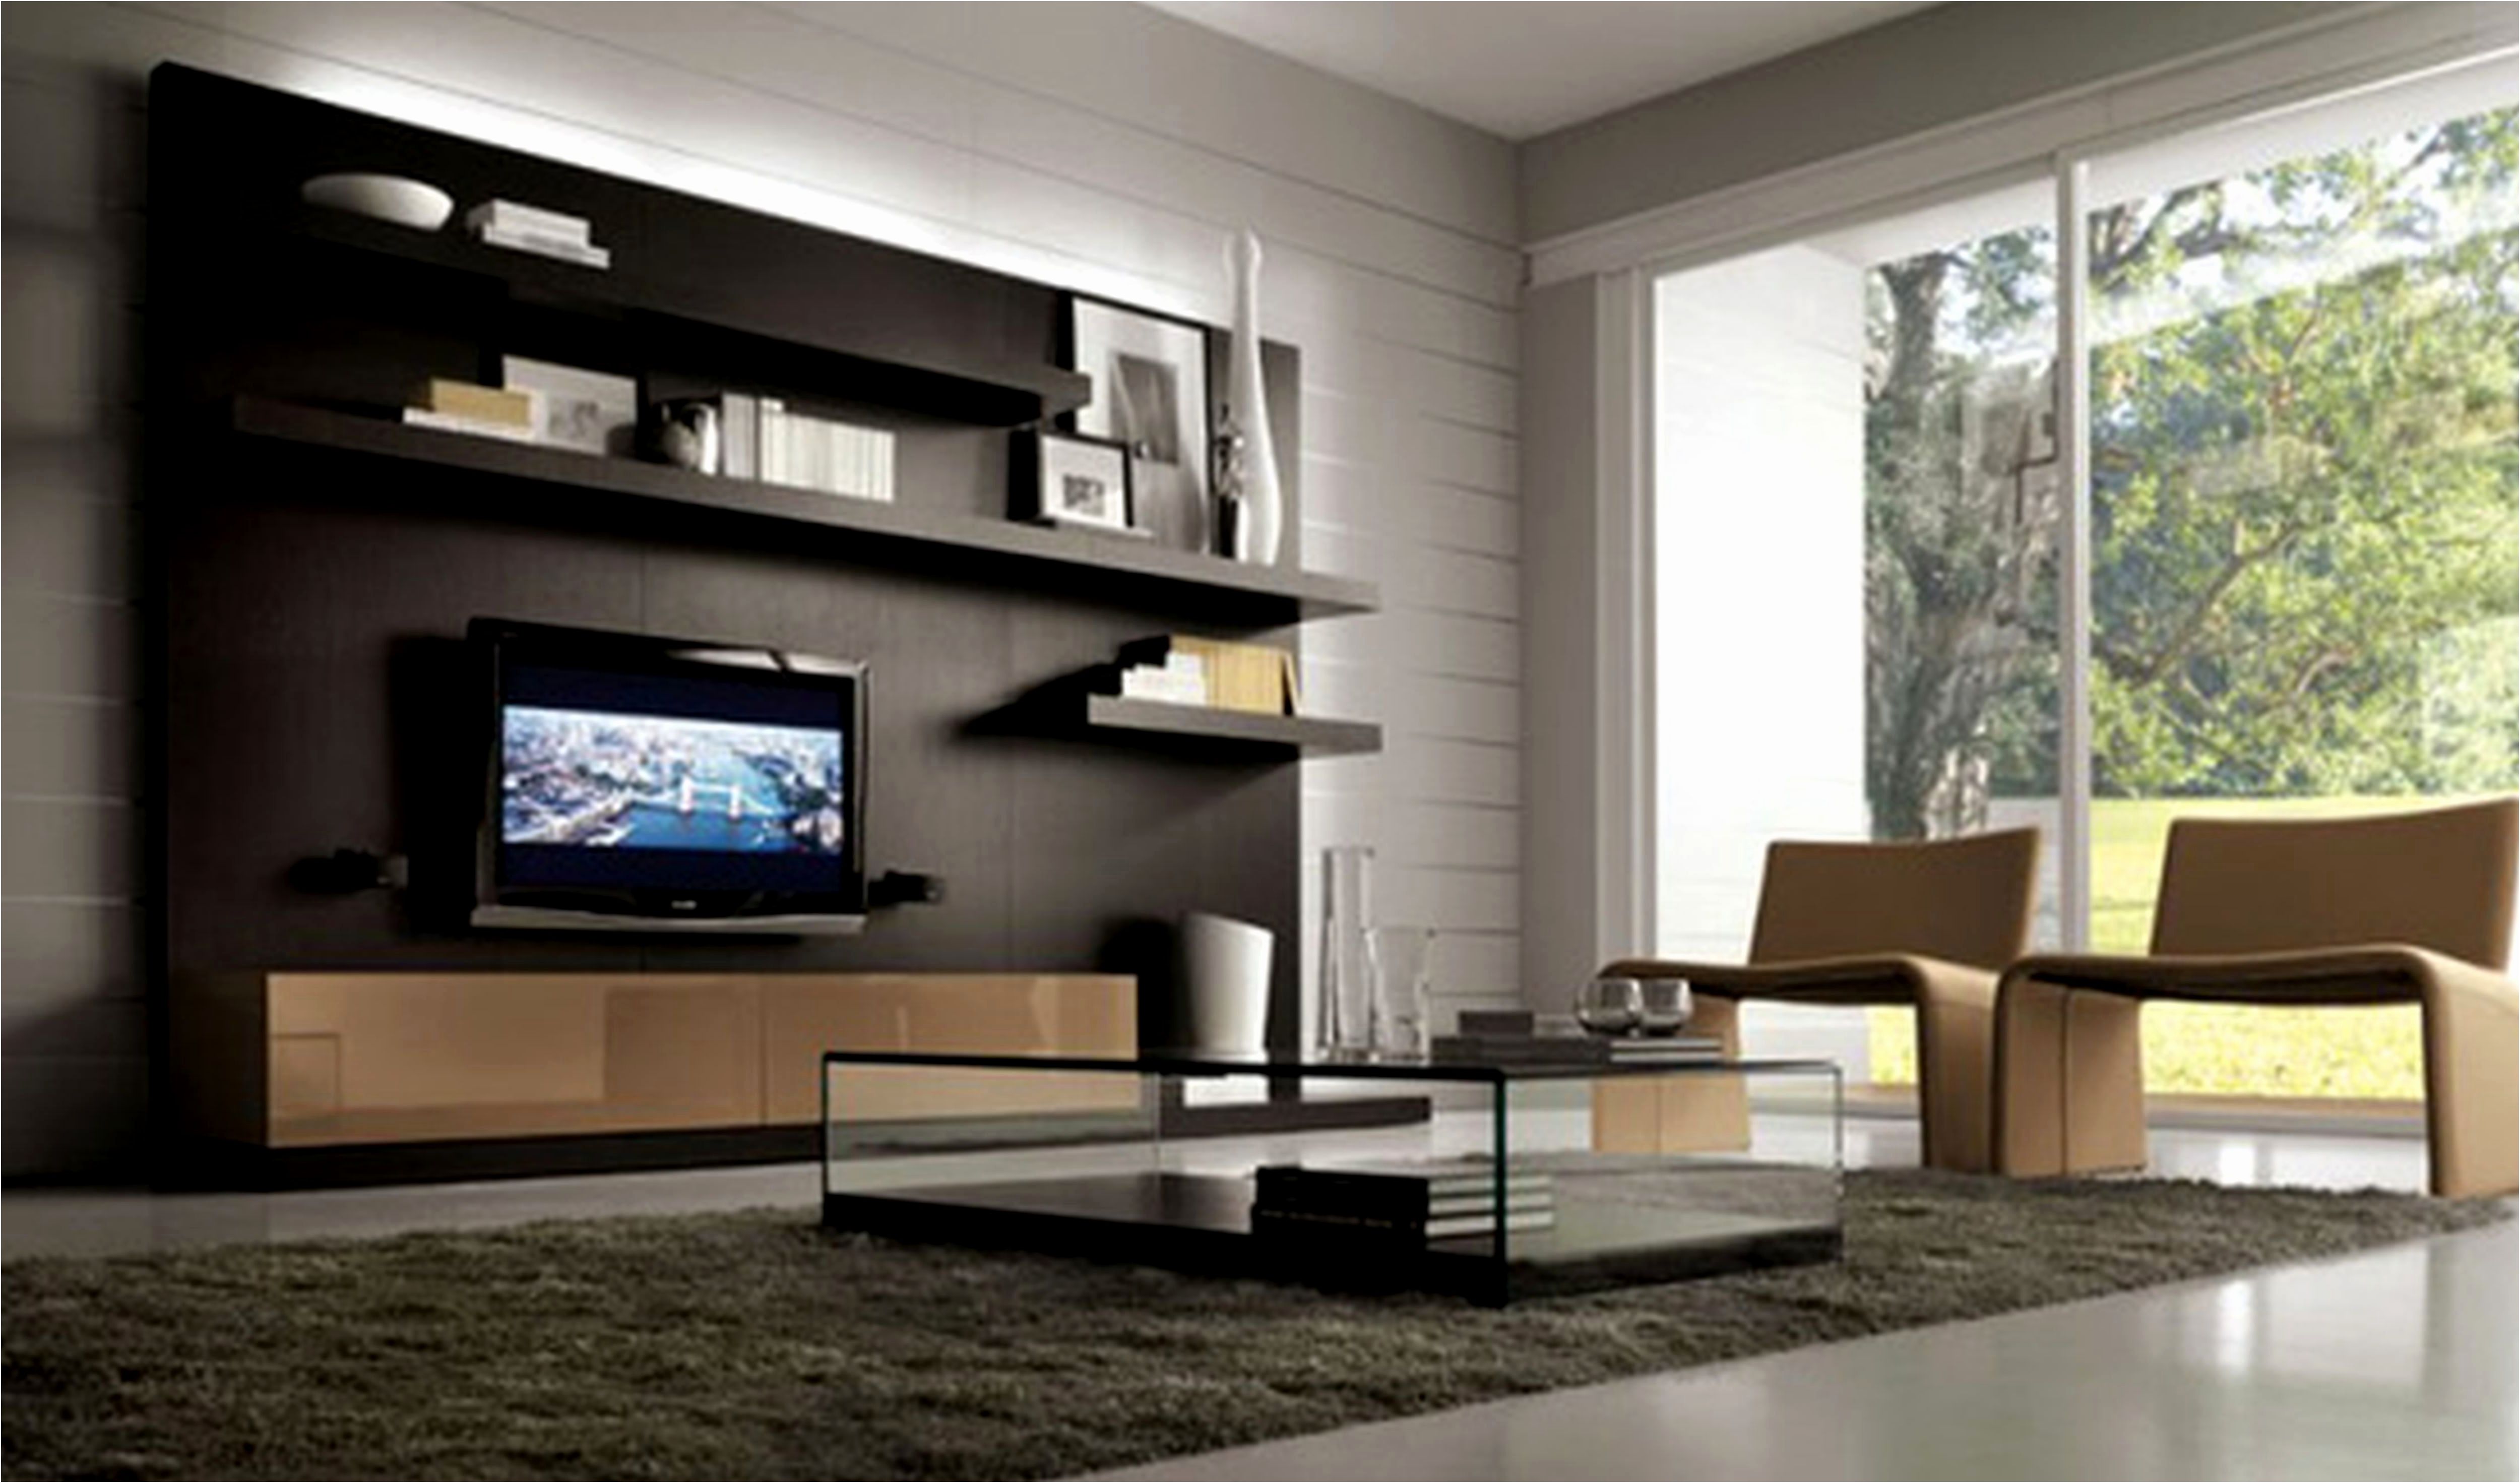 Bespoke Tv Cabinets For Most Popular Furniture : 2 Bespoke Fitted Tv Units Cabinets White High Gloss (View 13 of 15)